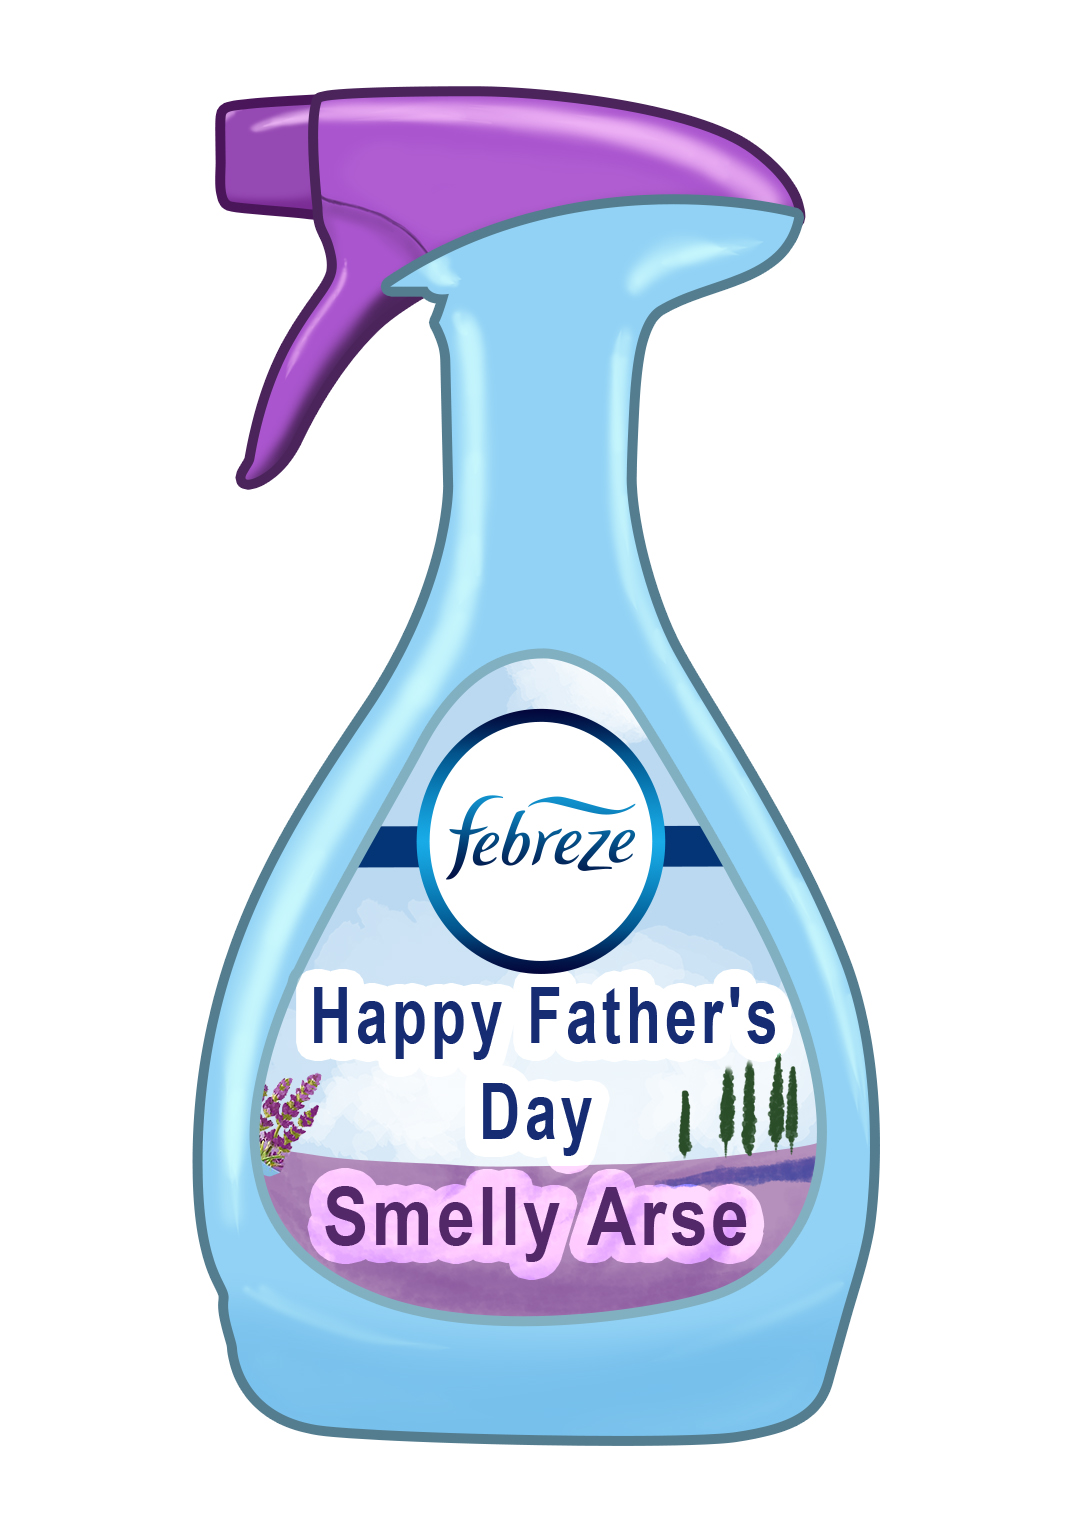 Smelly Arse - Father's Day Card